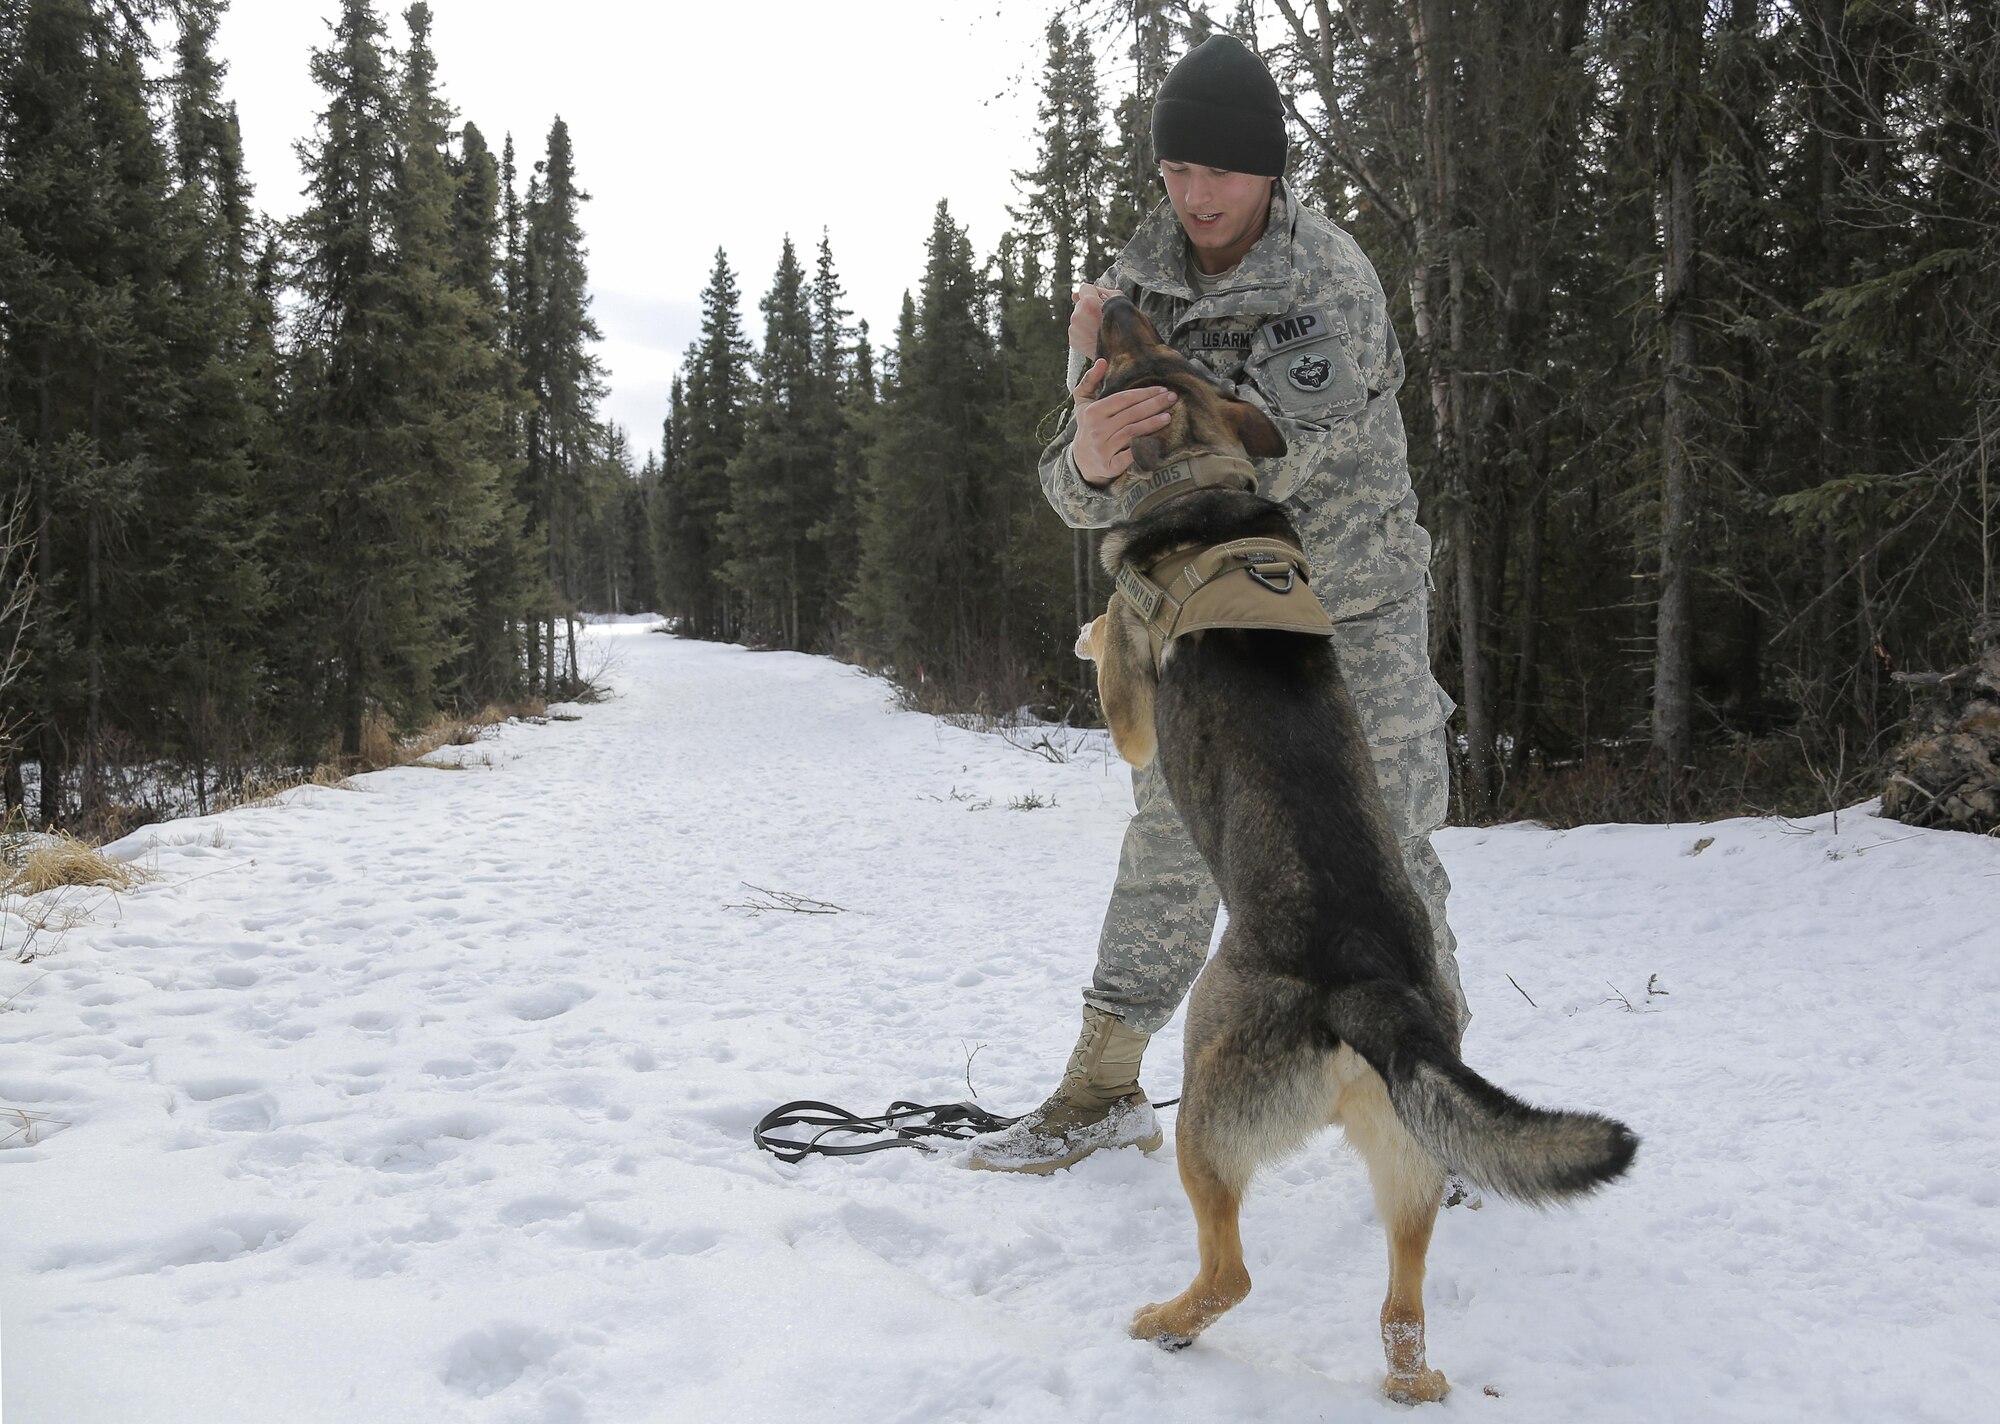 U.S. Army Pfc. Ian Smith encourages military working dog, Faro, assigned to the 549th Military Working Dog Detachment, after successfully detecting simulated hidden explosives during K-9 training at Joint Base Elmendorf-Richardson, Alaska, March 17, 2016. Military working dog teams are trained to respond to various law enforcement emergencies as well as detect hidden narcotics and explosives. (U.S. Air Force photo/Alejandro Pena)